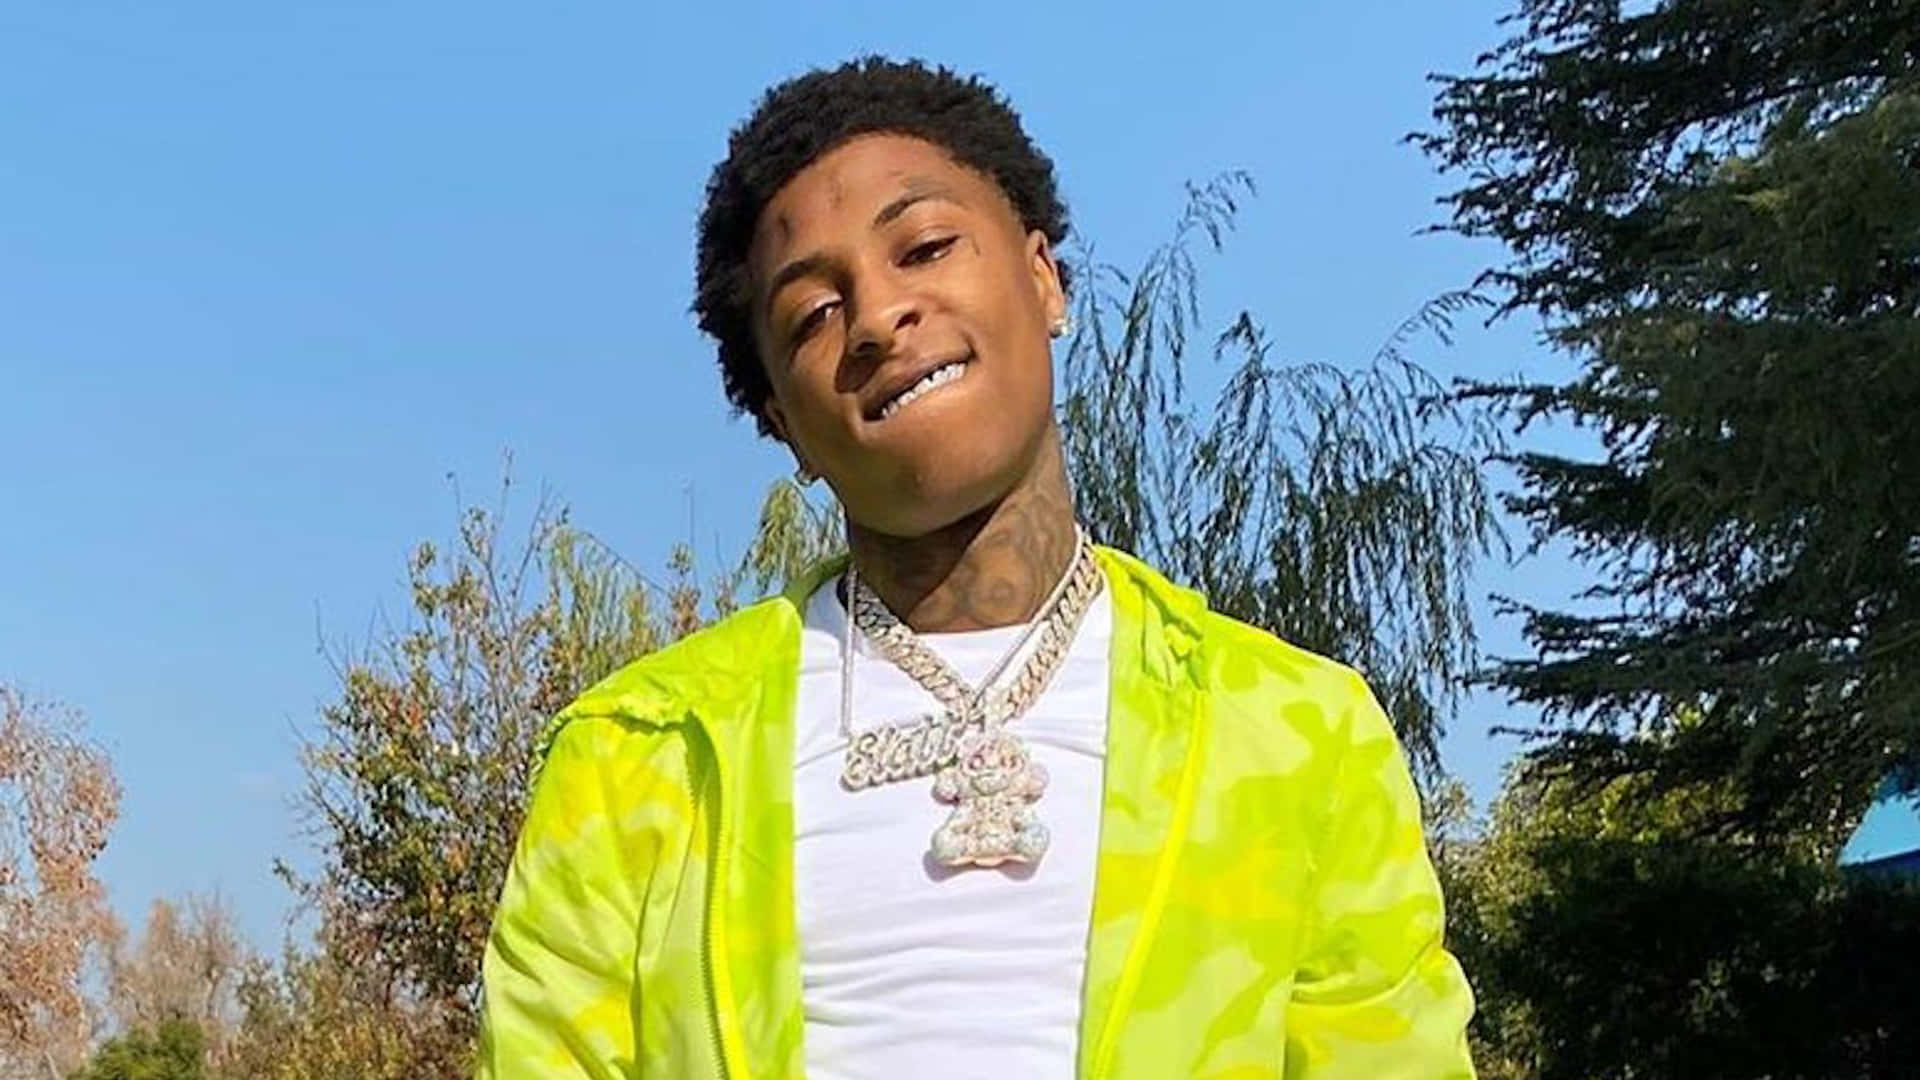 YoungBoy Never Broke Again is a rapper, singer, and songwriter.